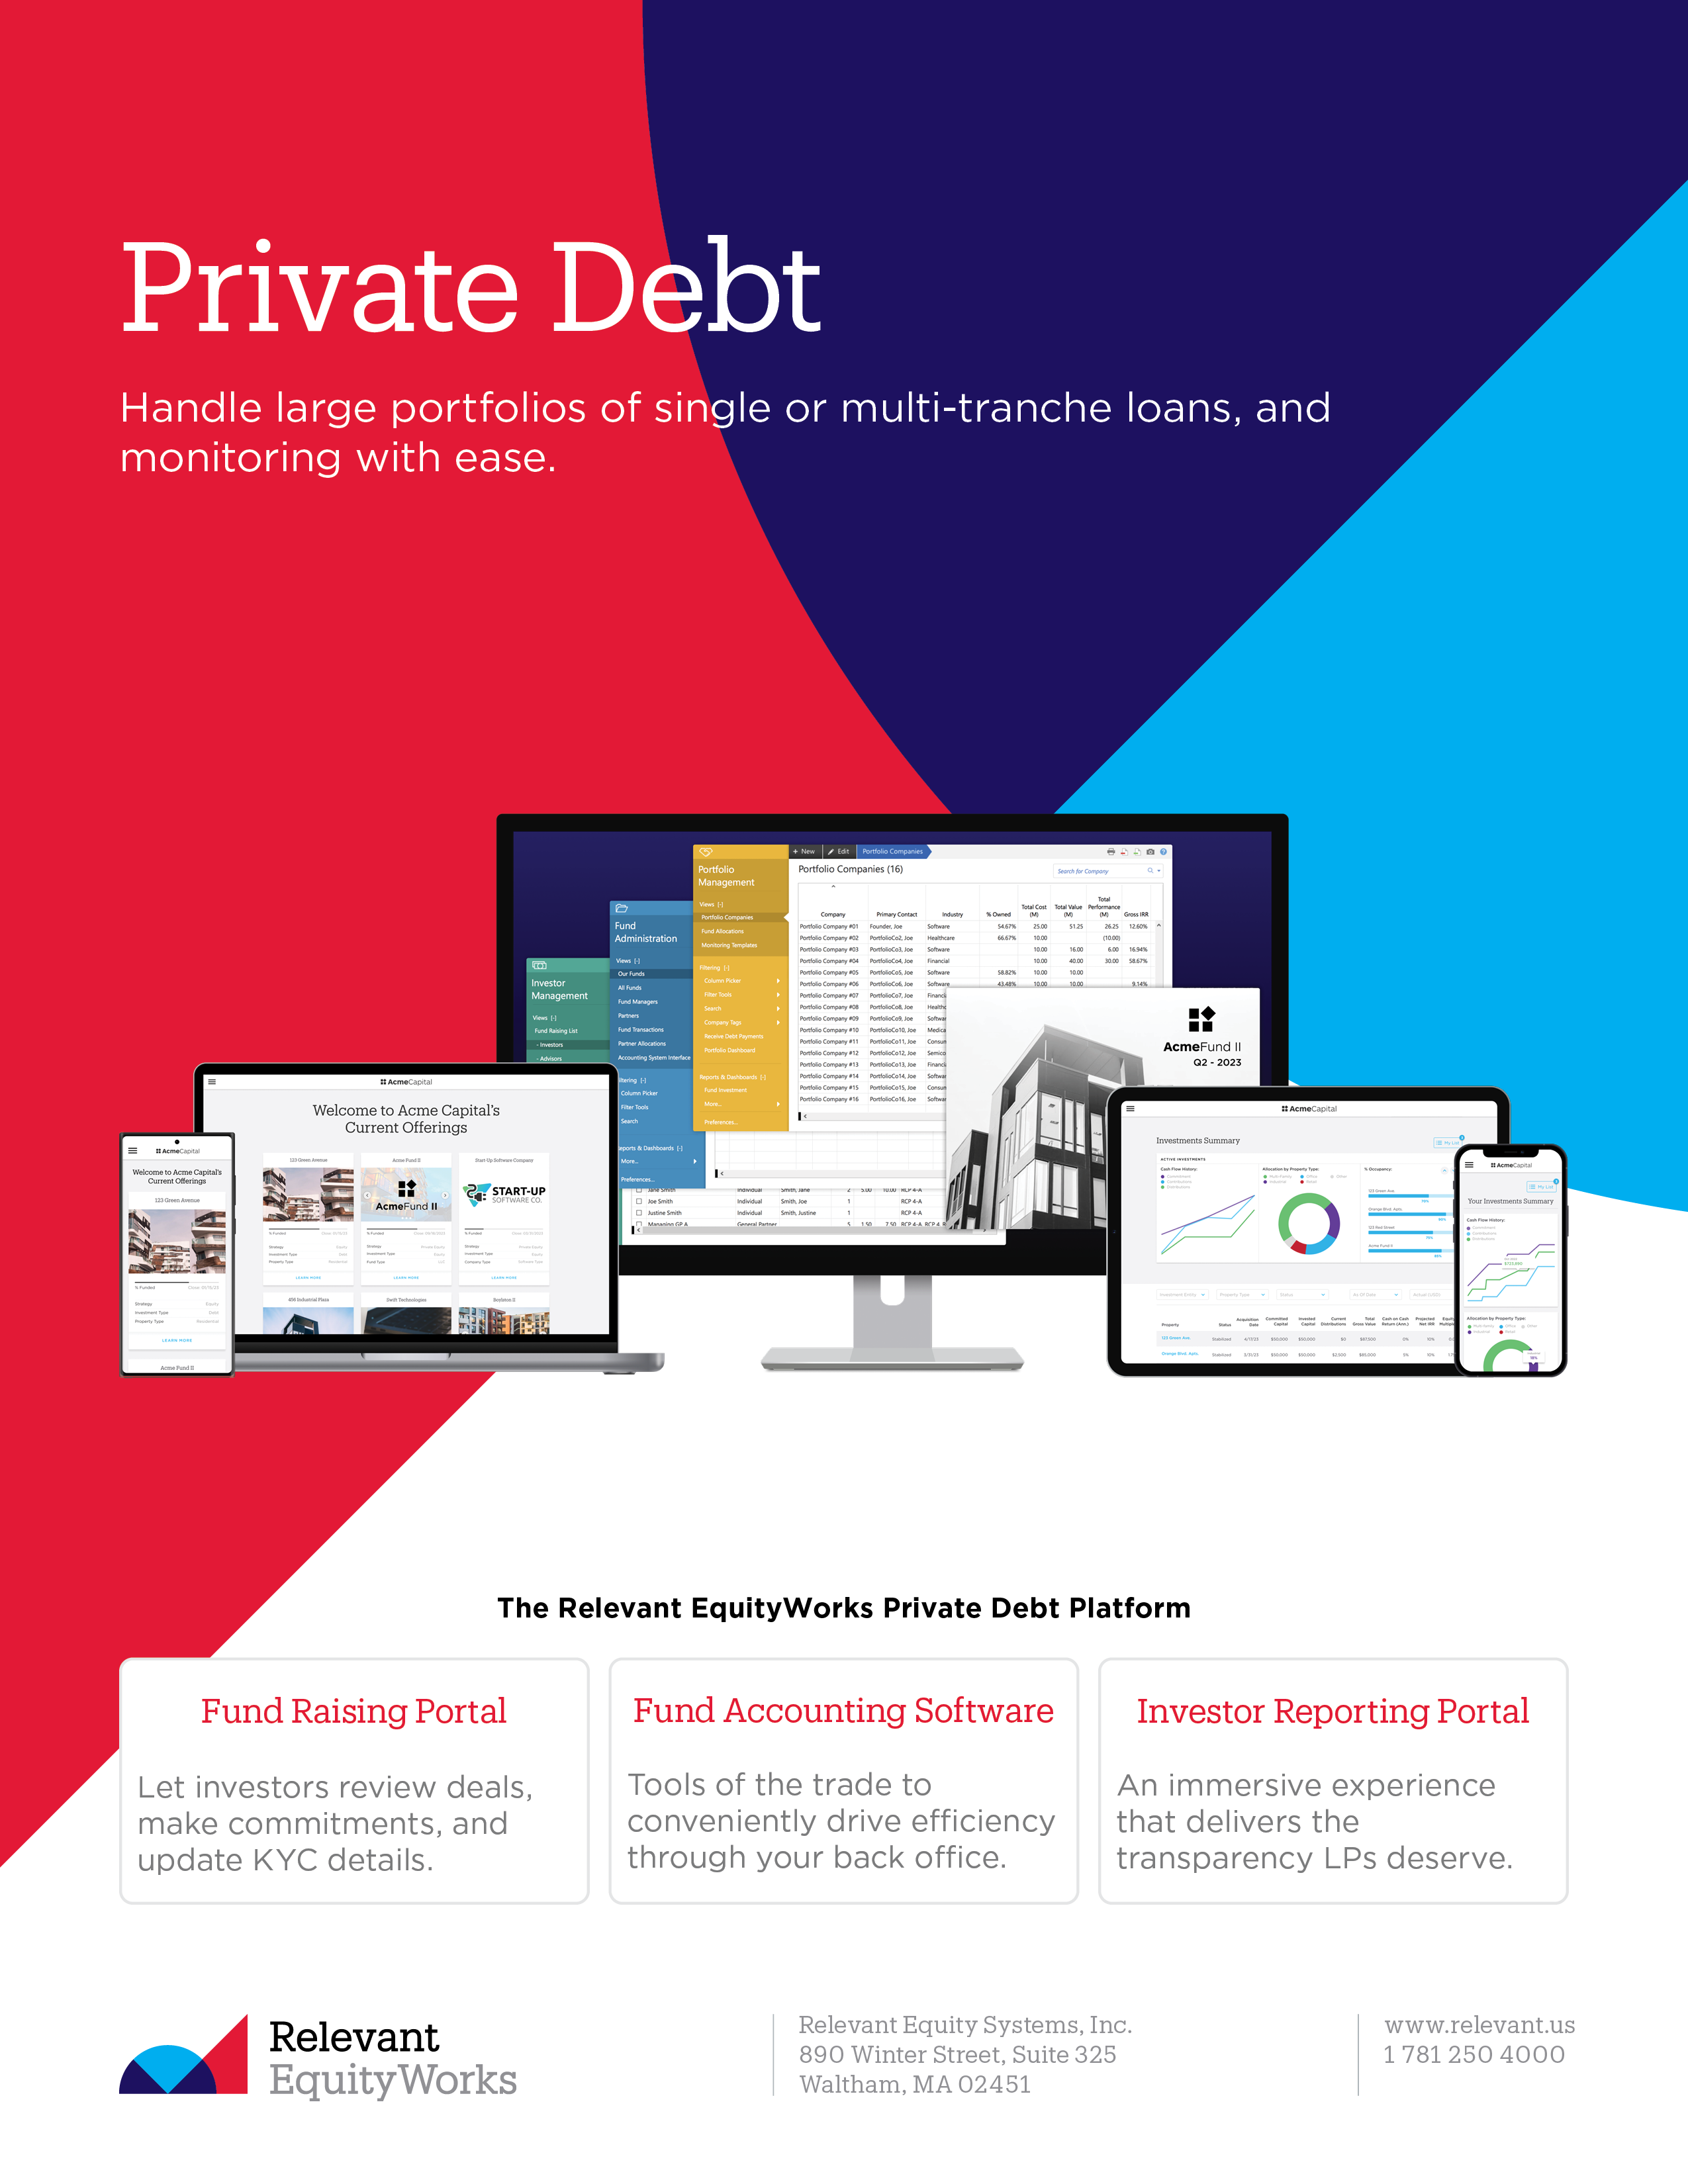 Relevant EquityWorks - Private Debt handout